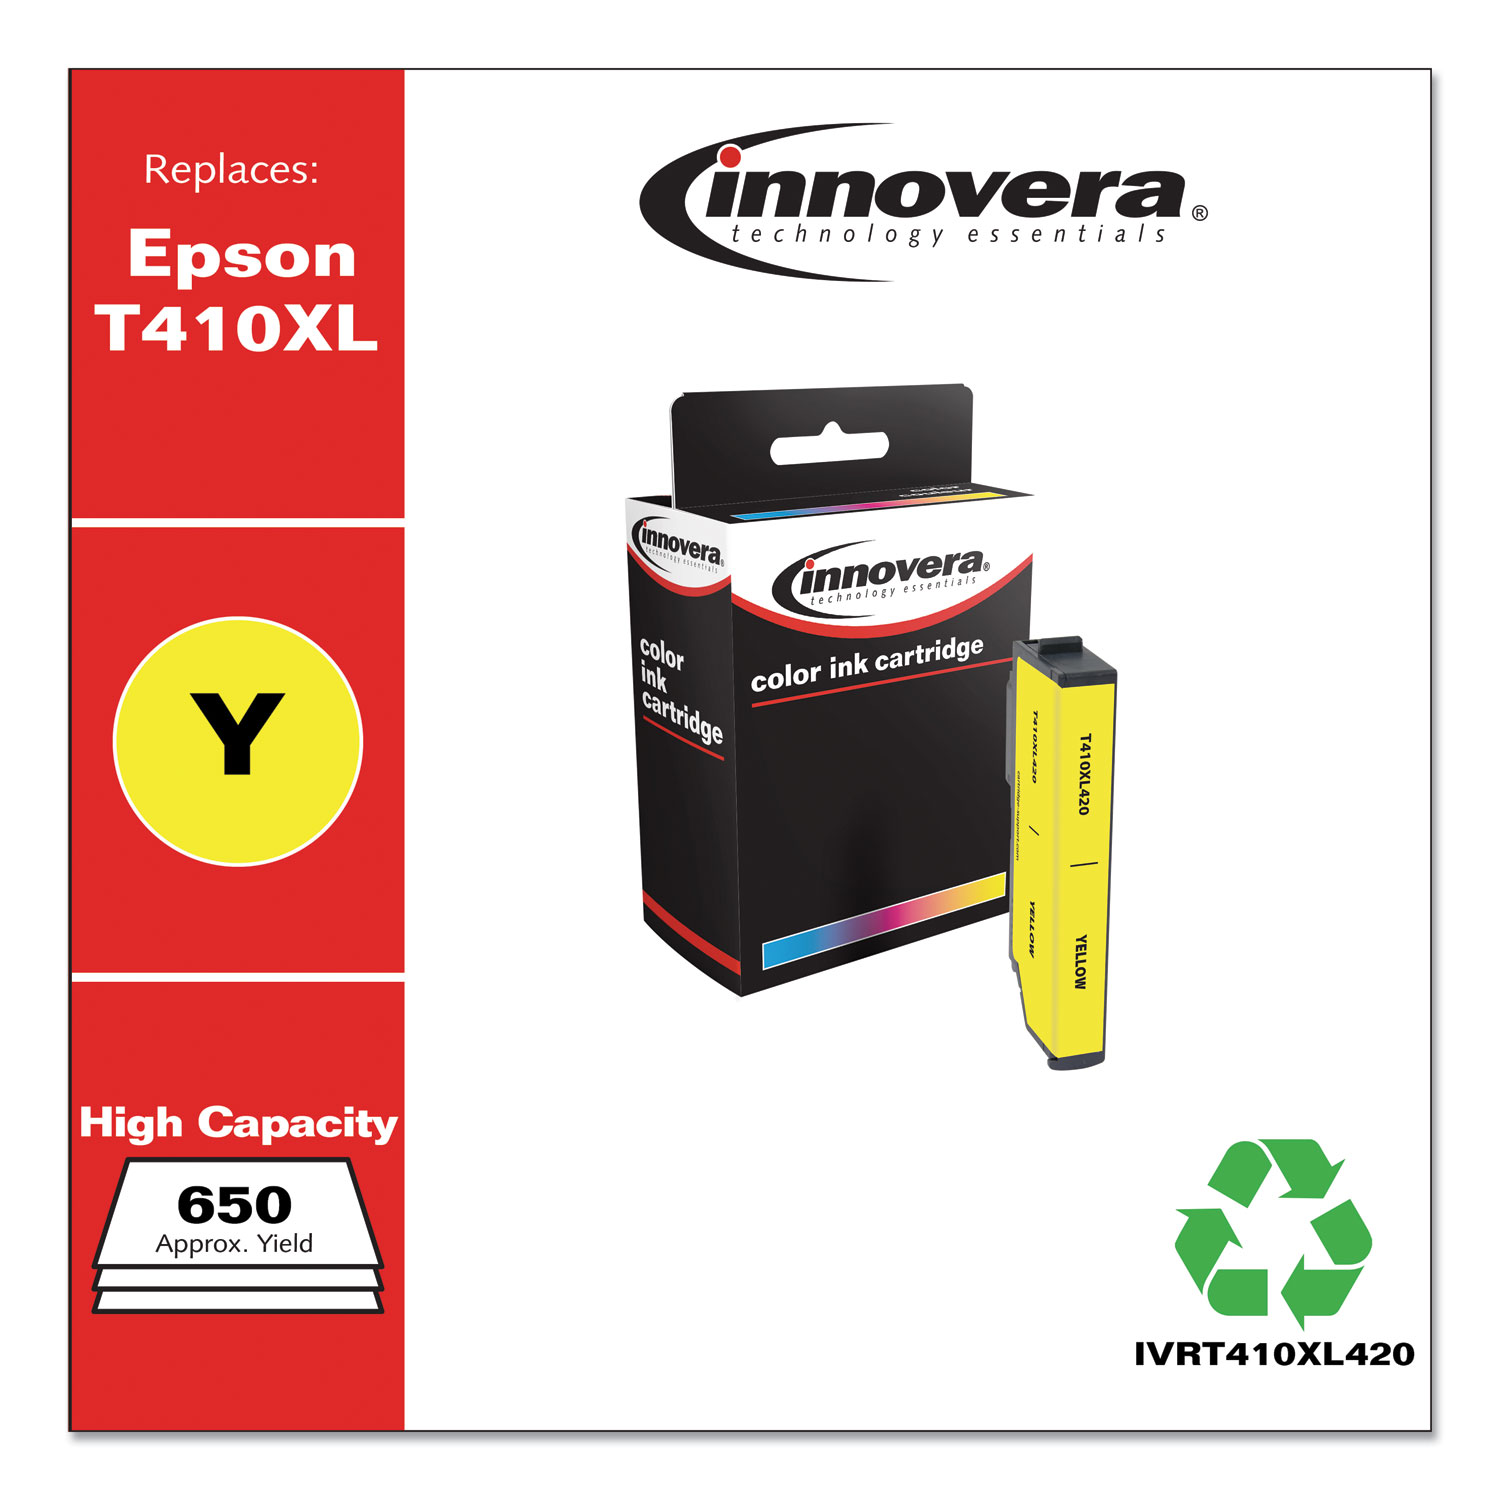  Innovera IVRT410XL420 Remanufactured Yellow High-Yield Ink, Replacement for Epson T410XL (T410XL420), 650 Page-Yield (IVRT410XL420) 